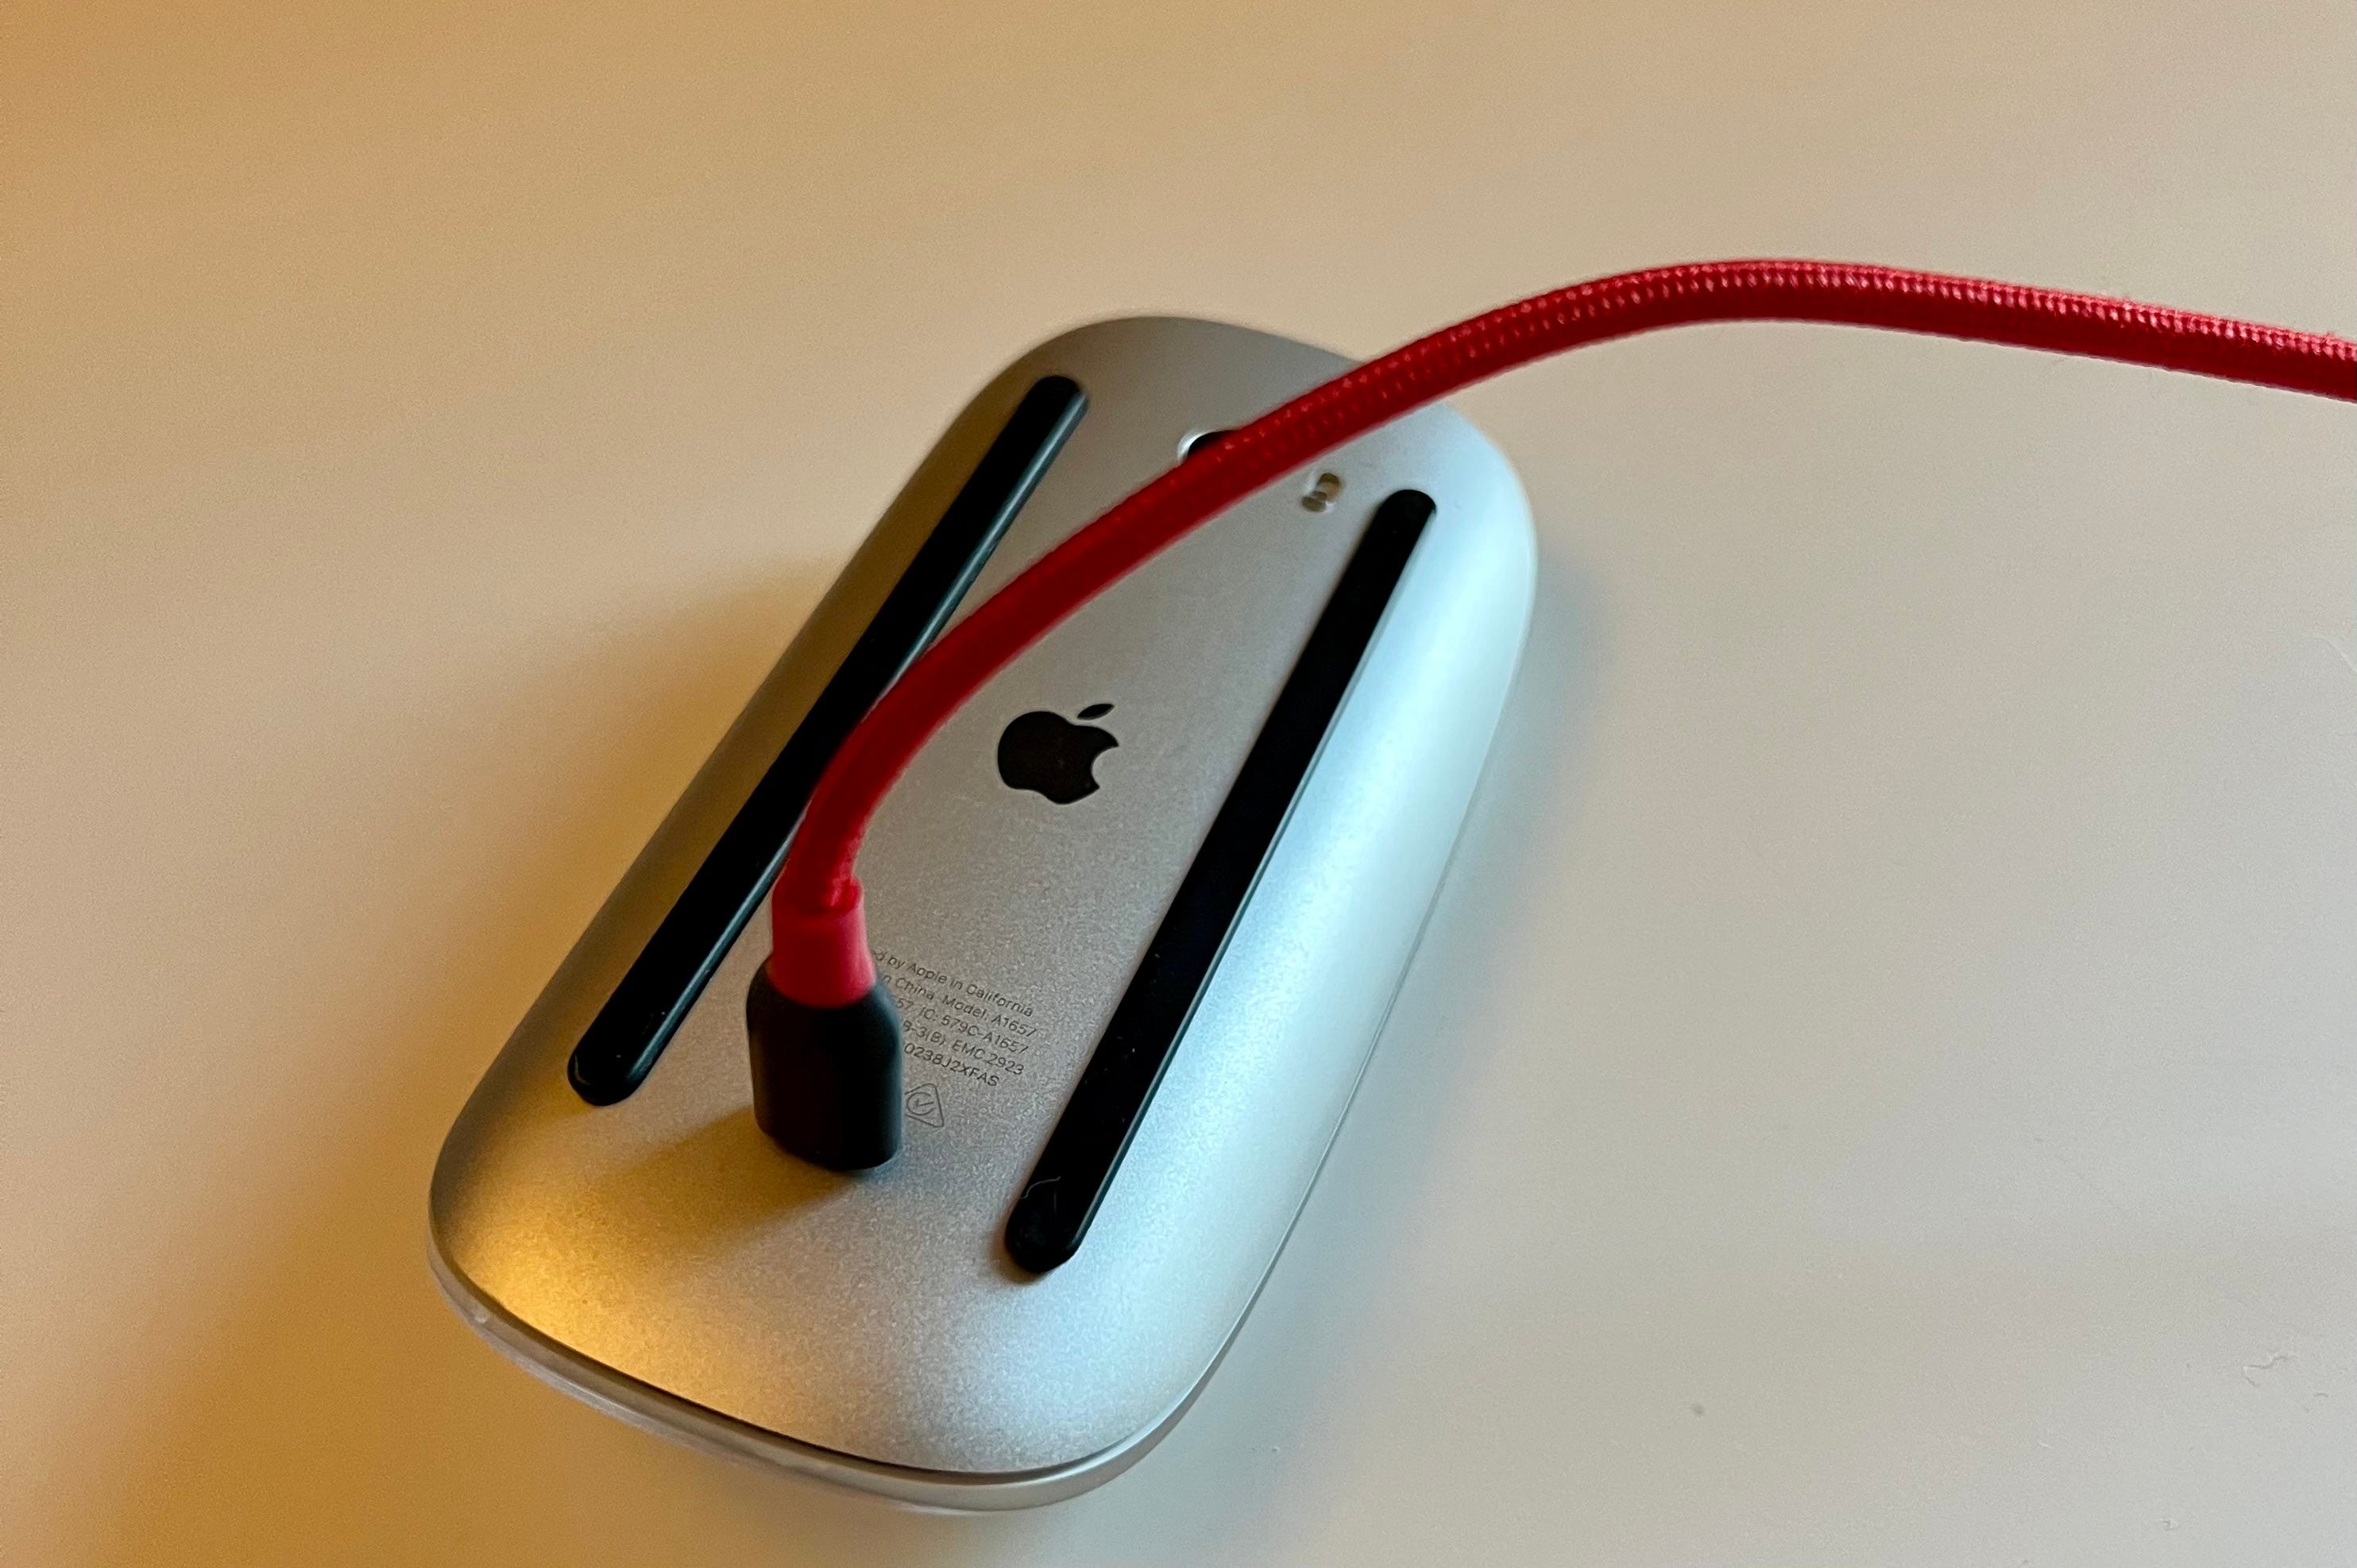 How the Apple Magic Mouse charges is the least of its design issues